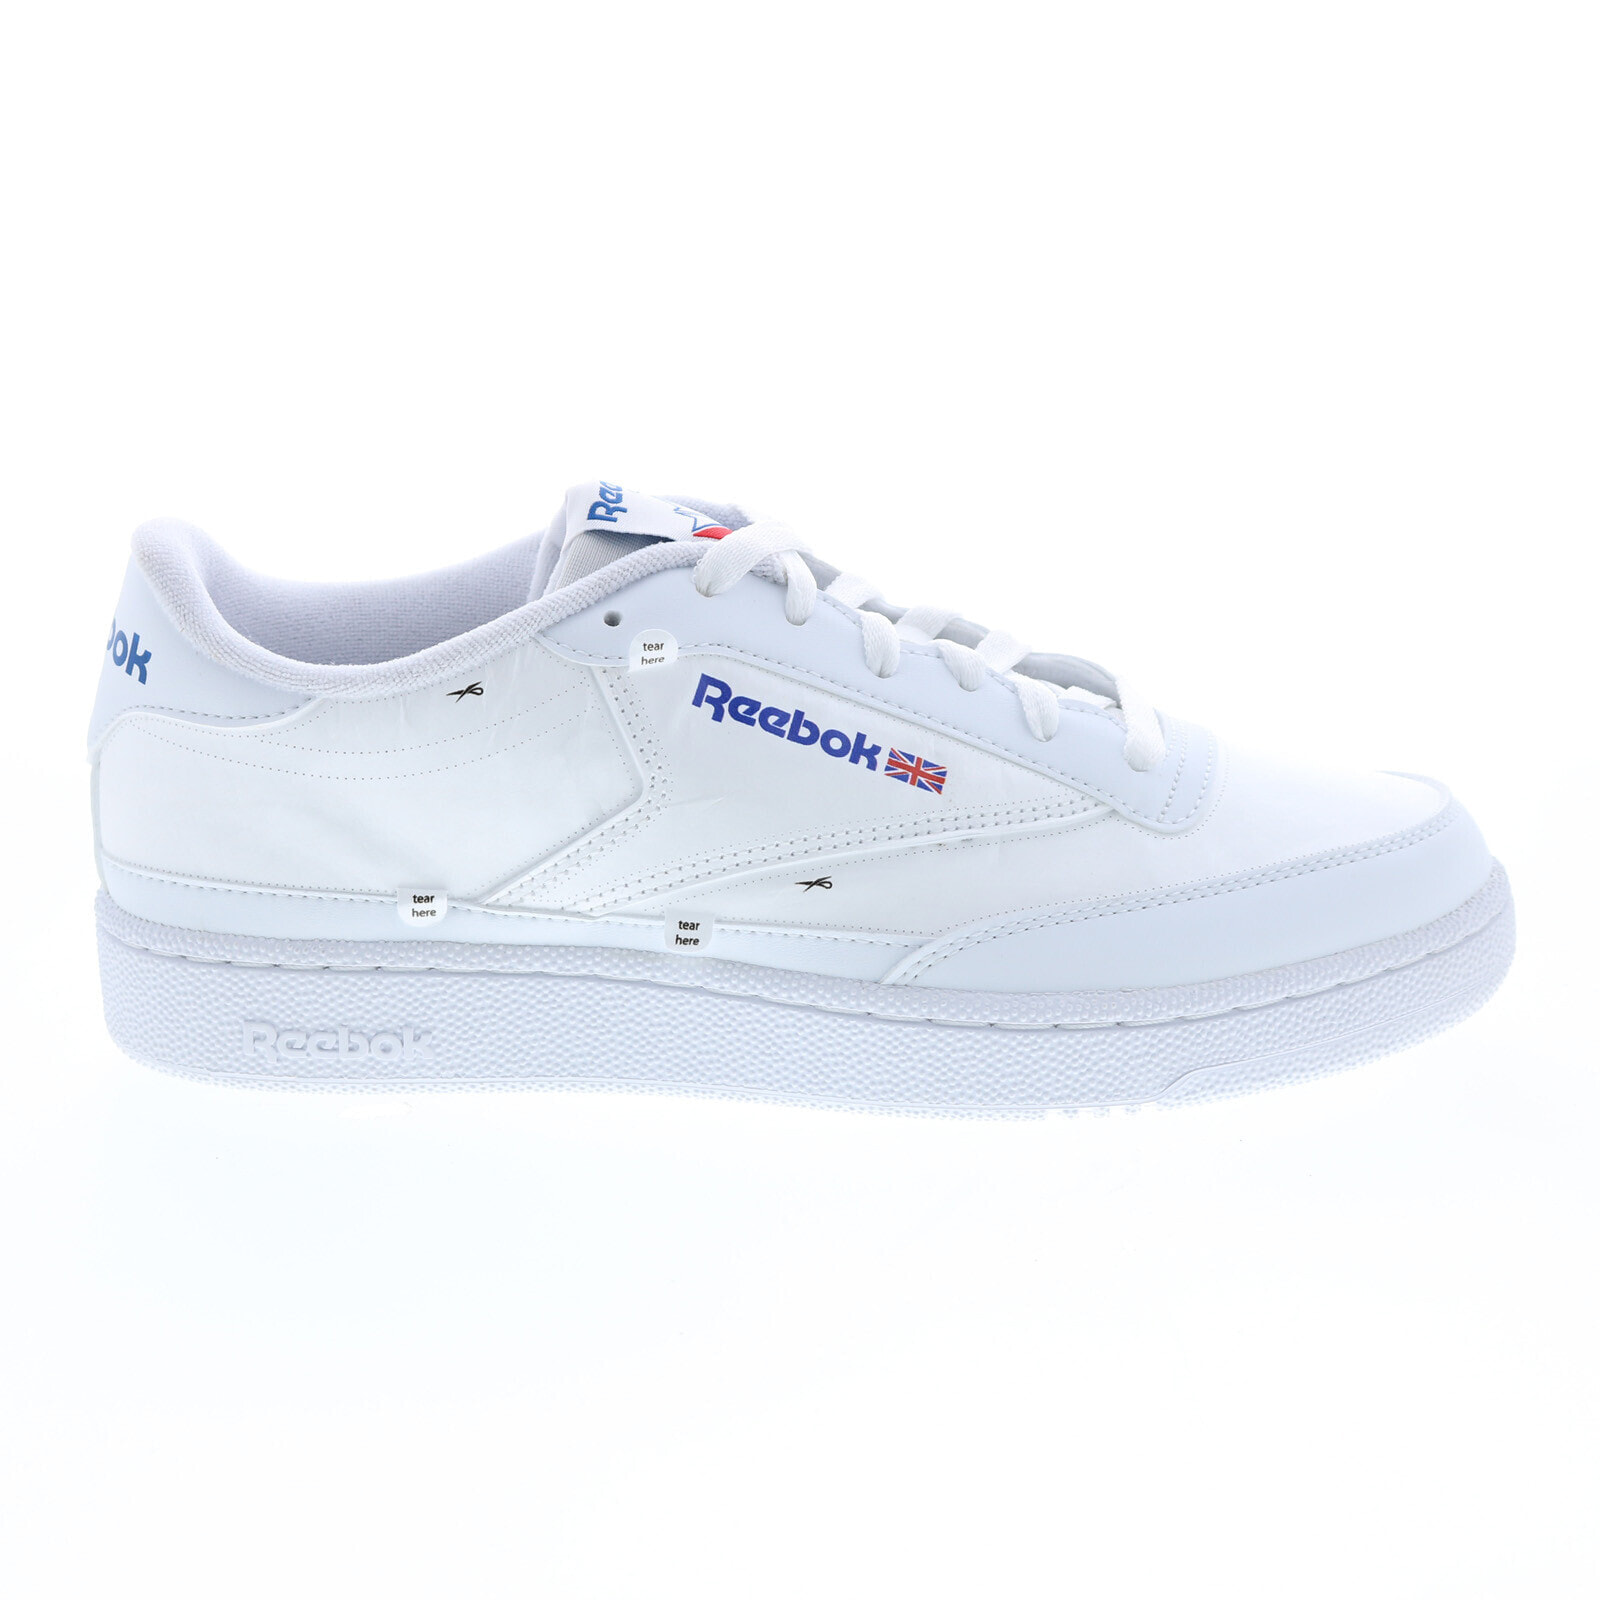 Reebok Club C 85 X U GY8789 Mens White Leather Lifestyle Sneakers Shoes